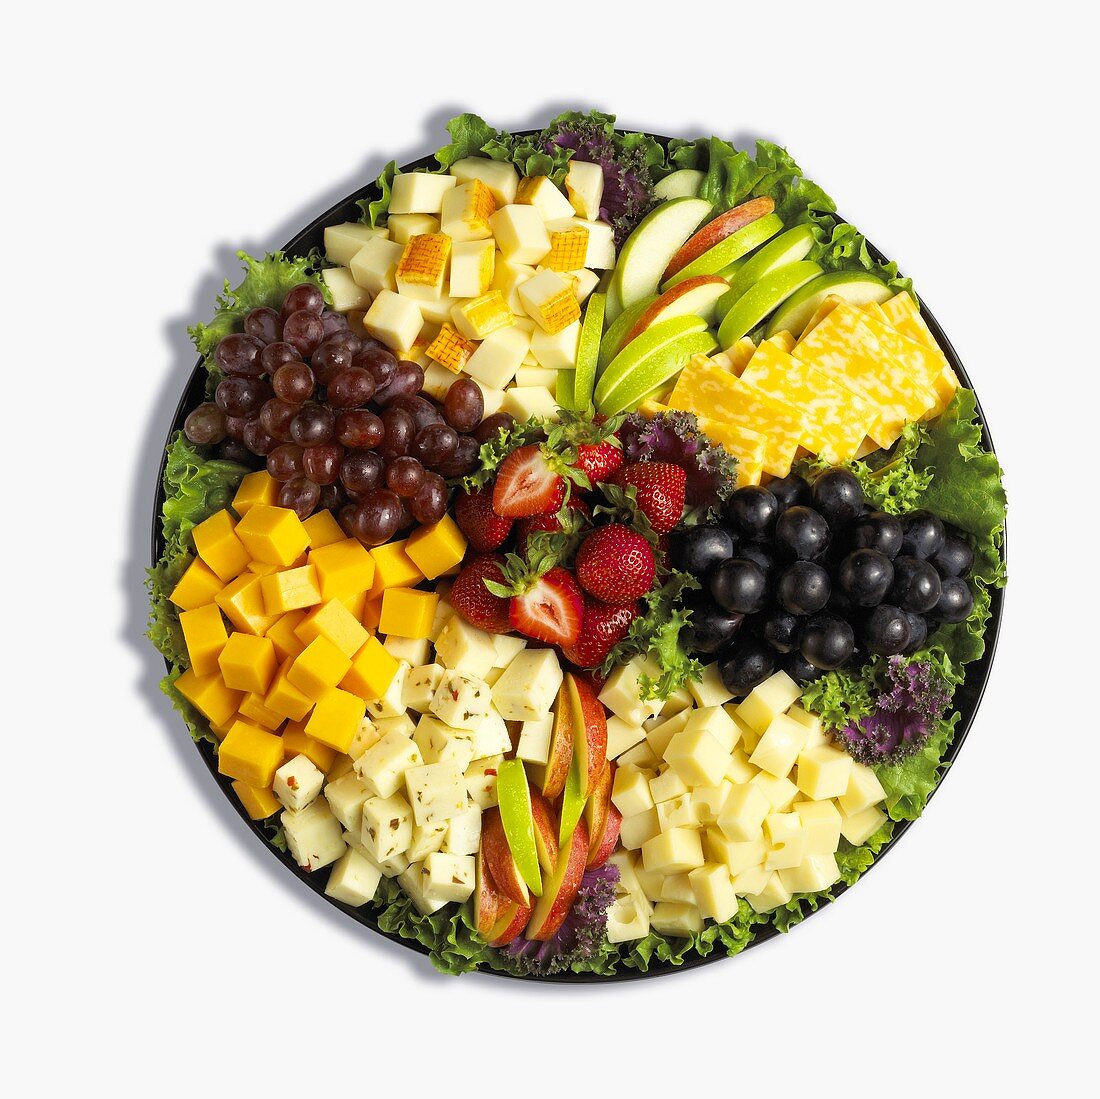 A Fruit and Cheese Platter